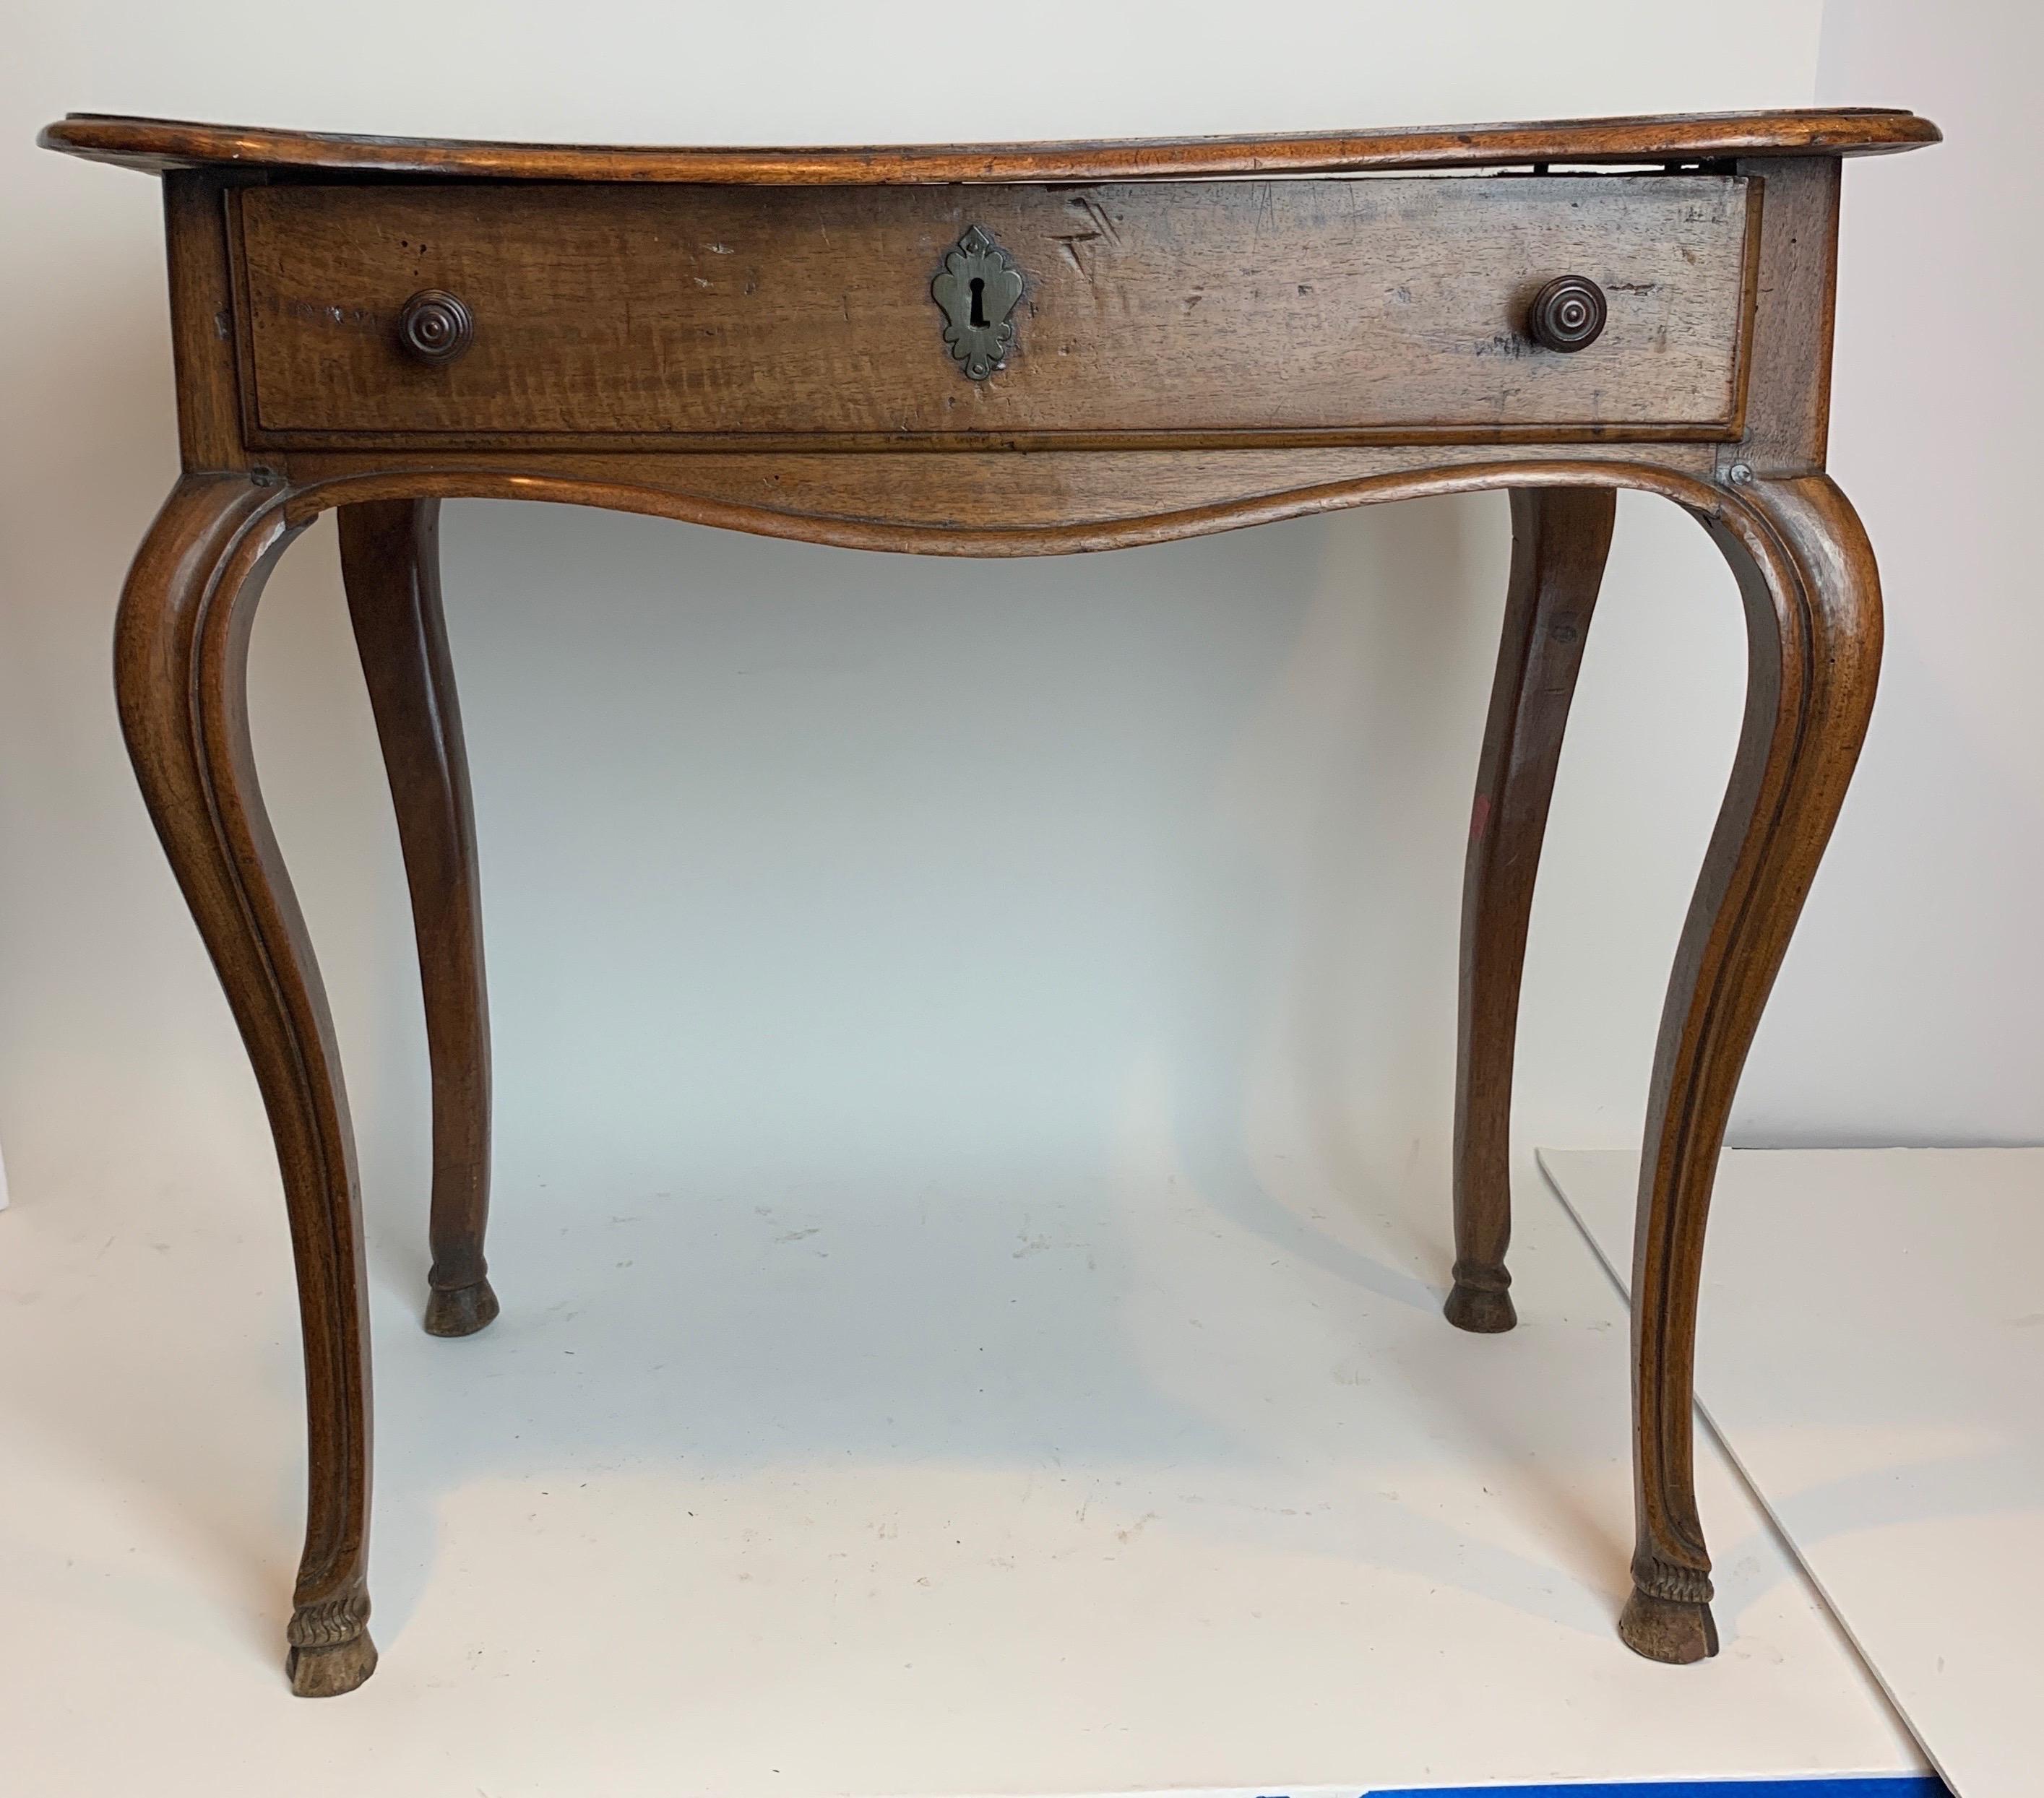 French work table with cabriole legs and a hoof foot. 18th century and made out of Walnut. One drawer on front. Single board top with a thumb molding. Distressed top.